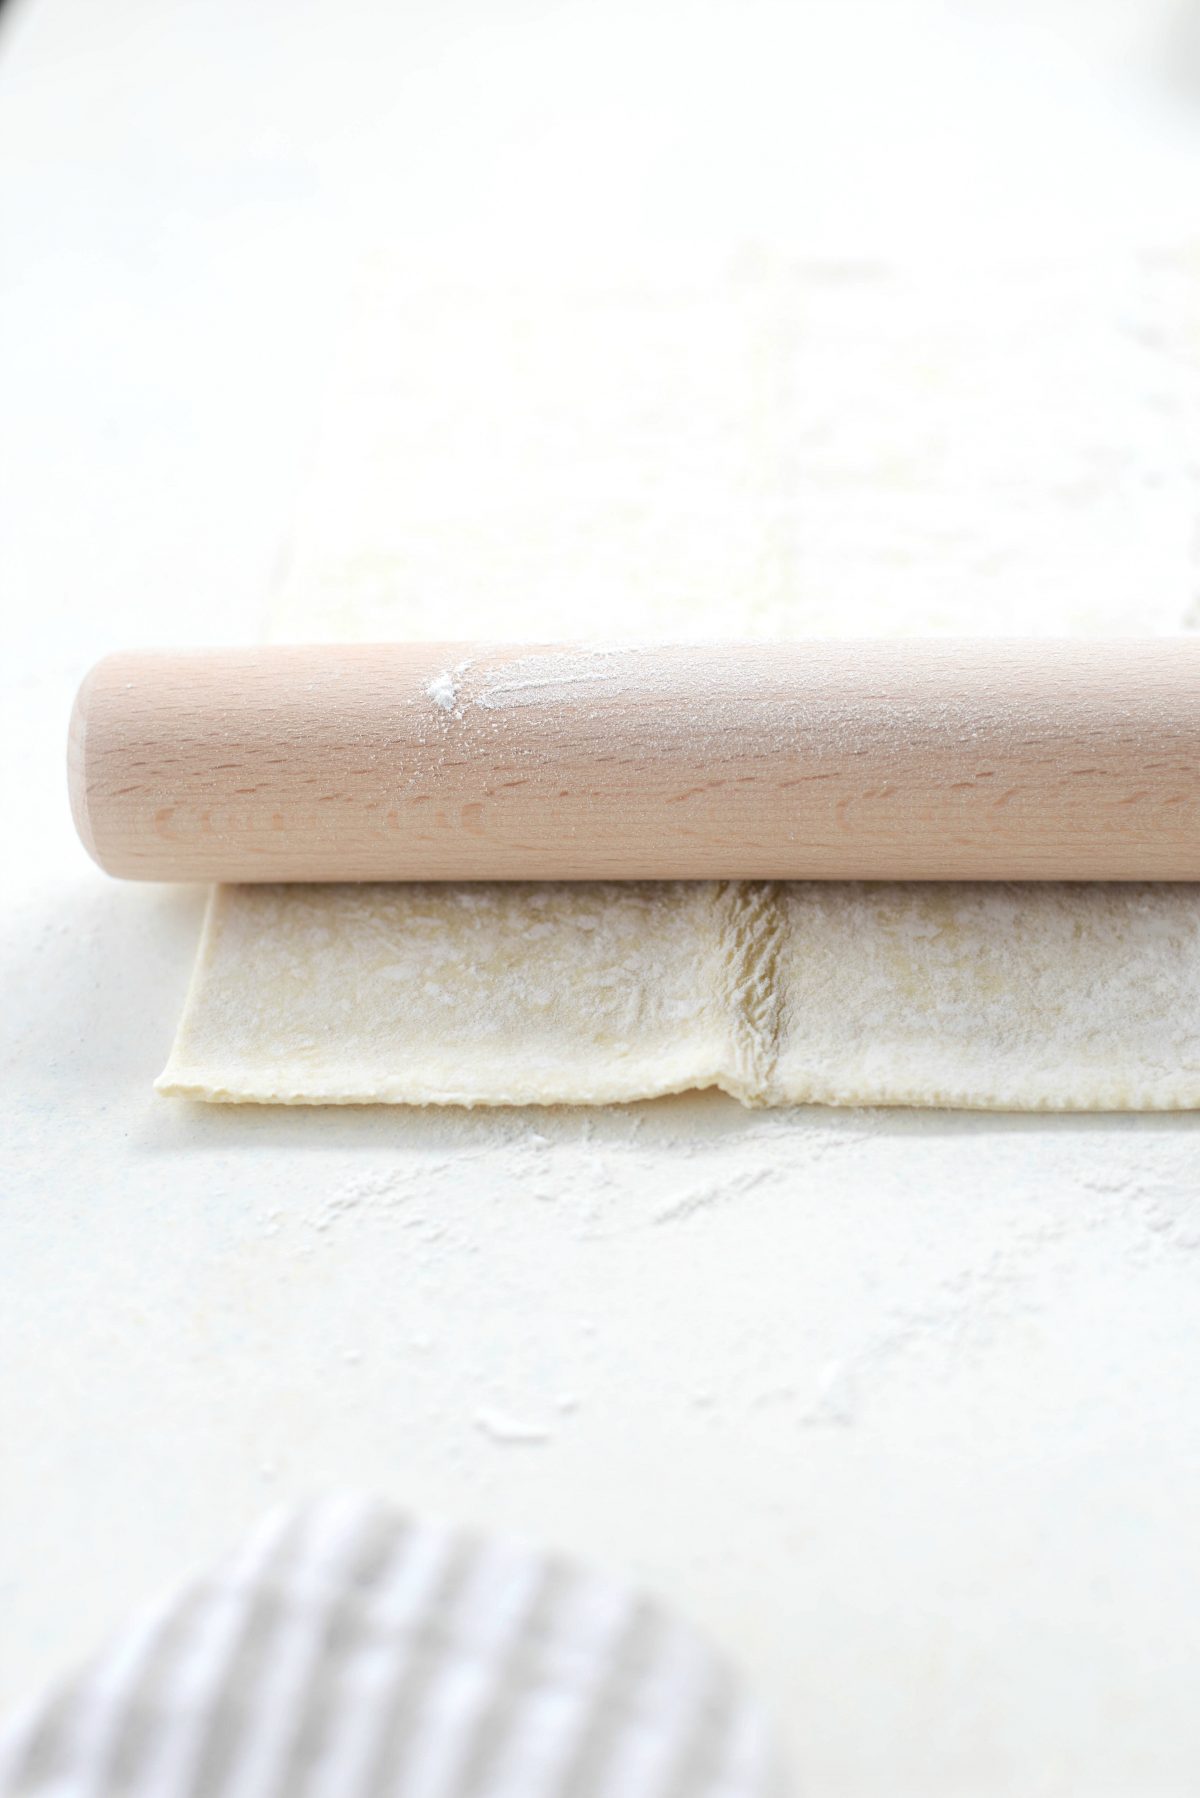 gently roll out puff pastry